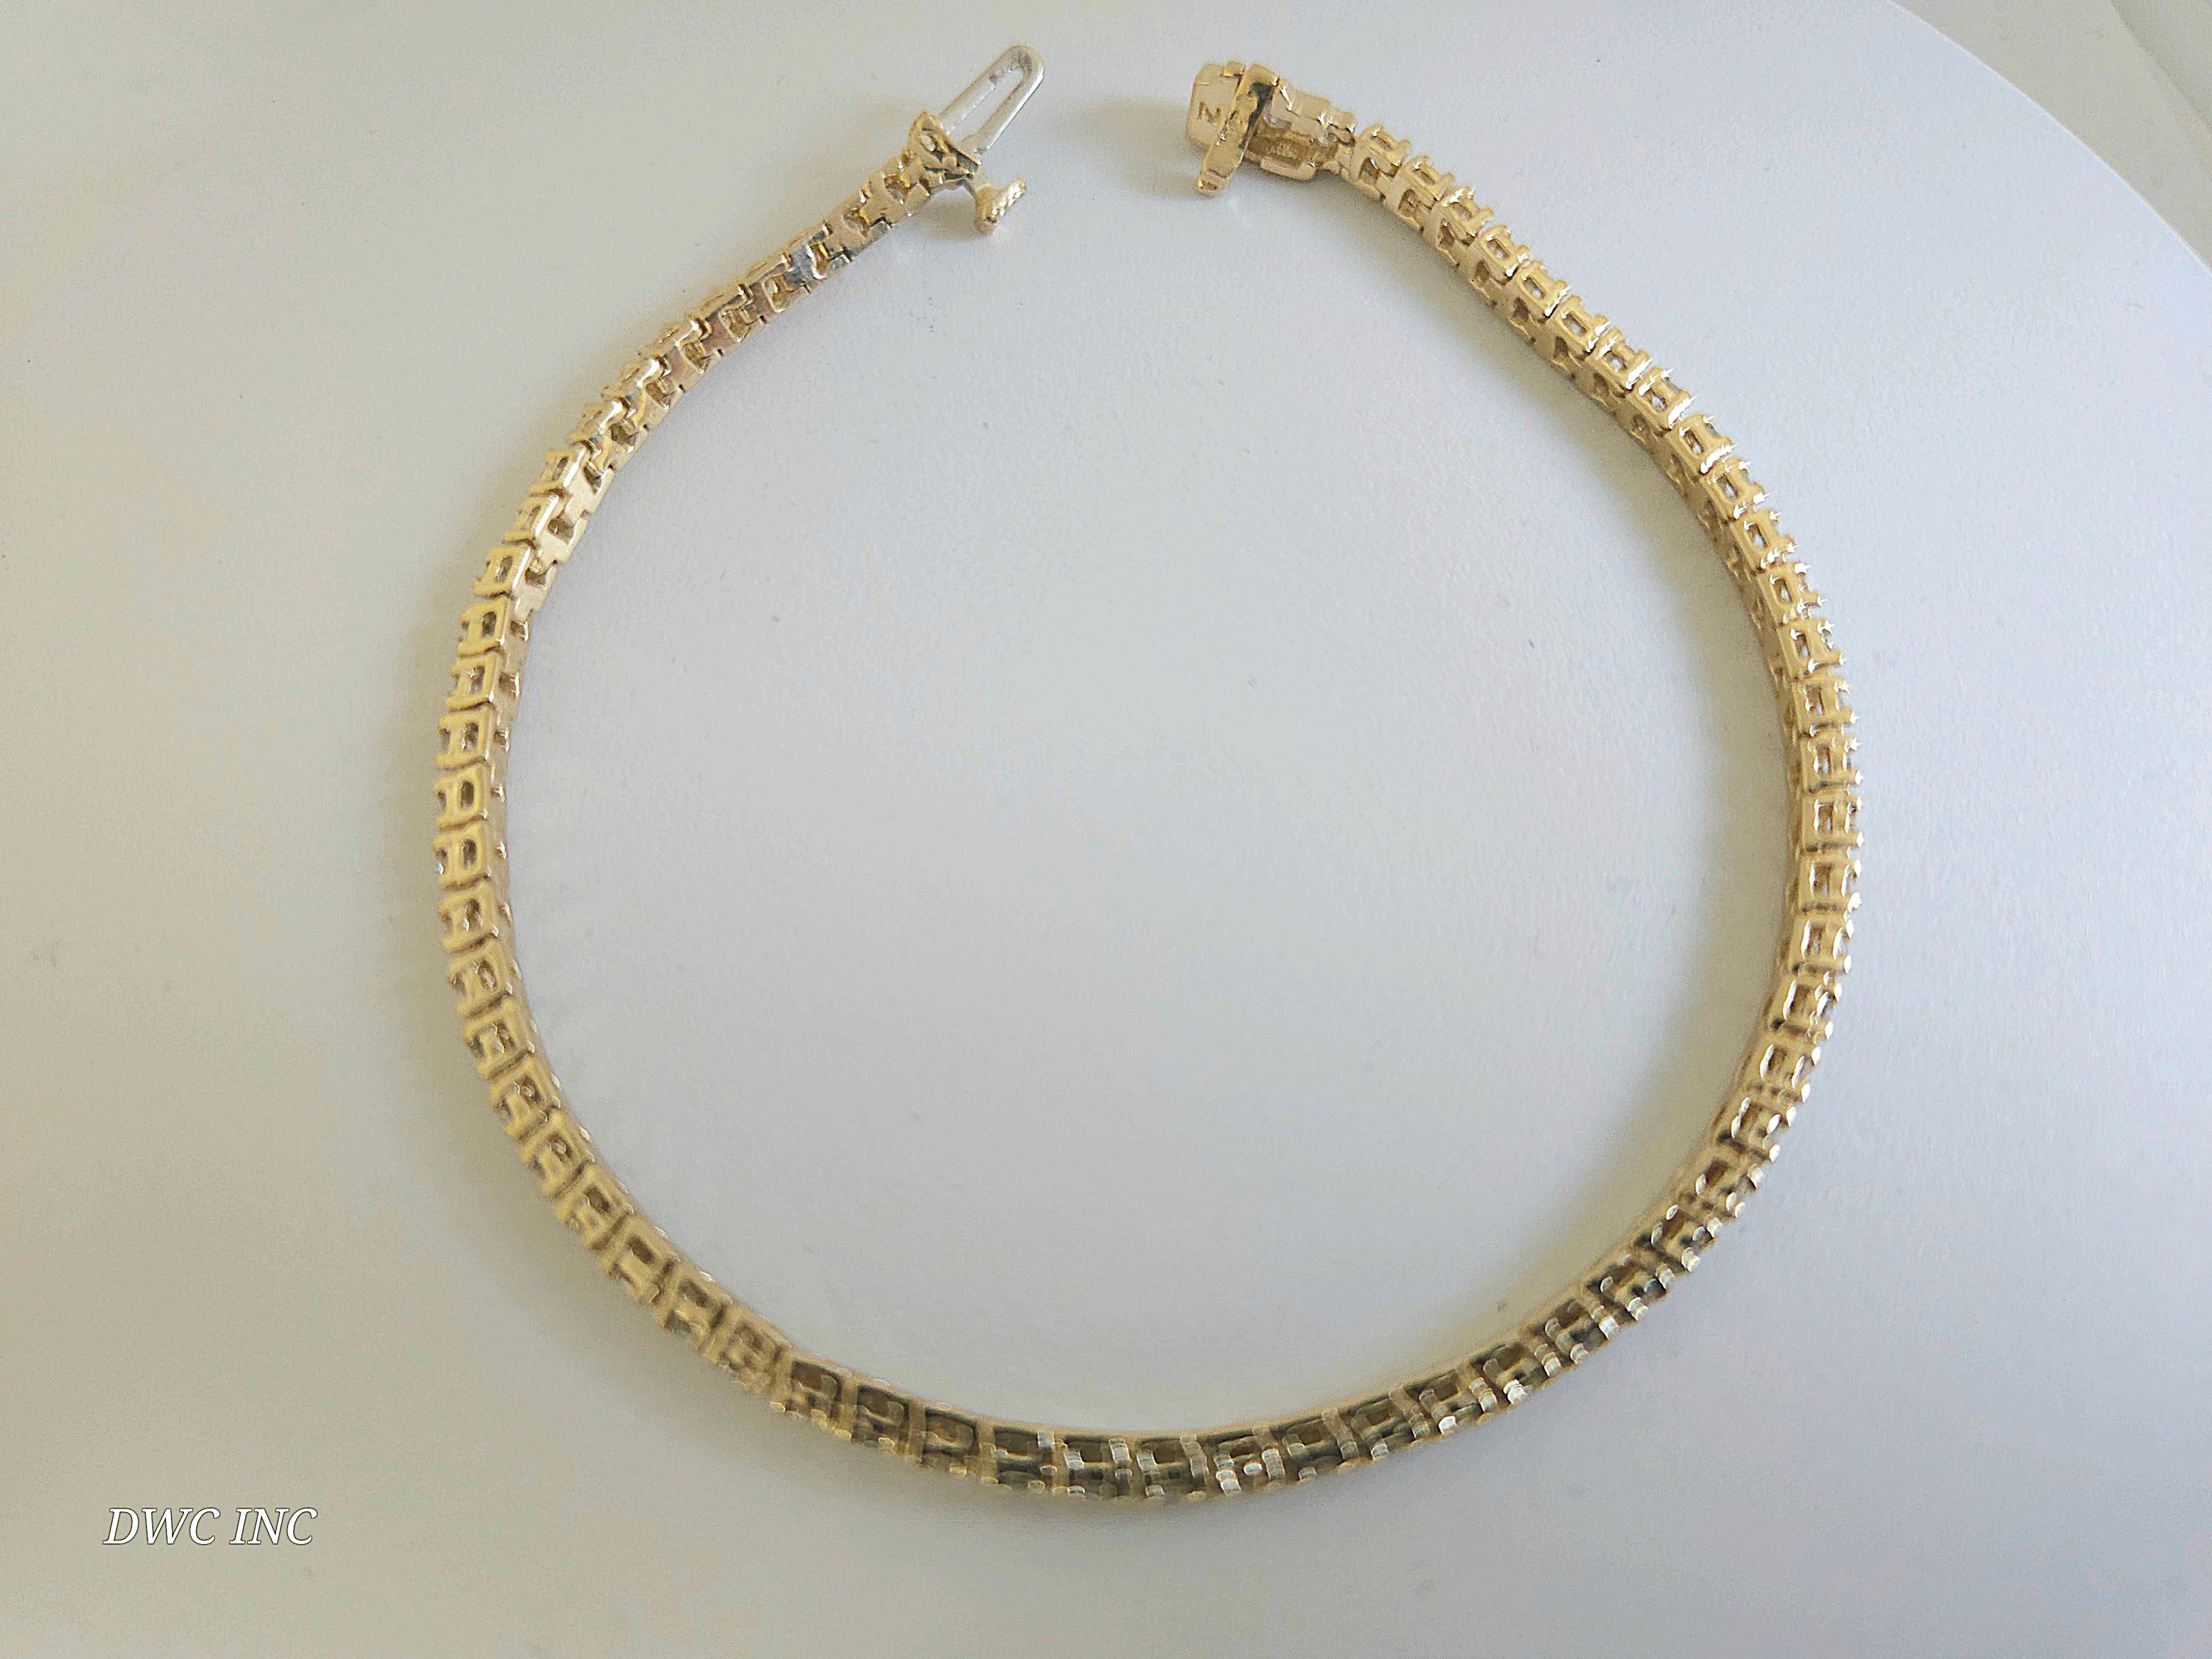 1.85 Carat Round Brilliant Cut Diamond Tennis Bracelet 14 Karat Yellow Gold In New Condition For Sale In Great Neck, NY